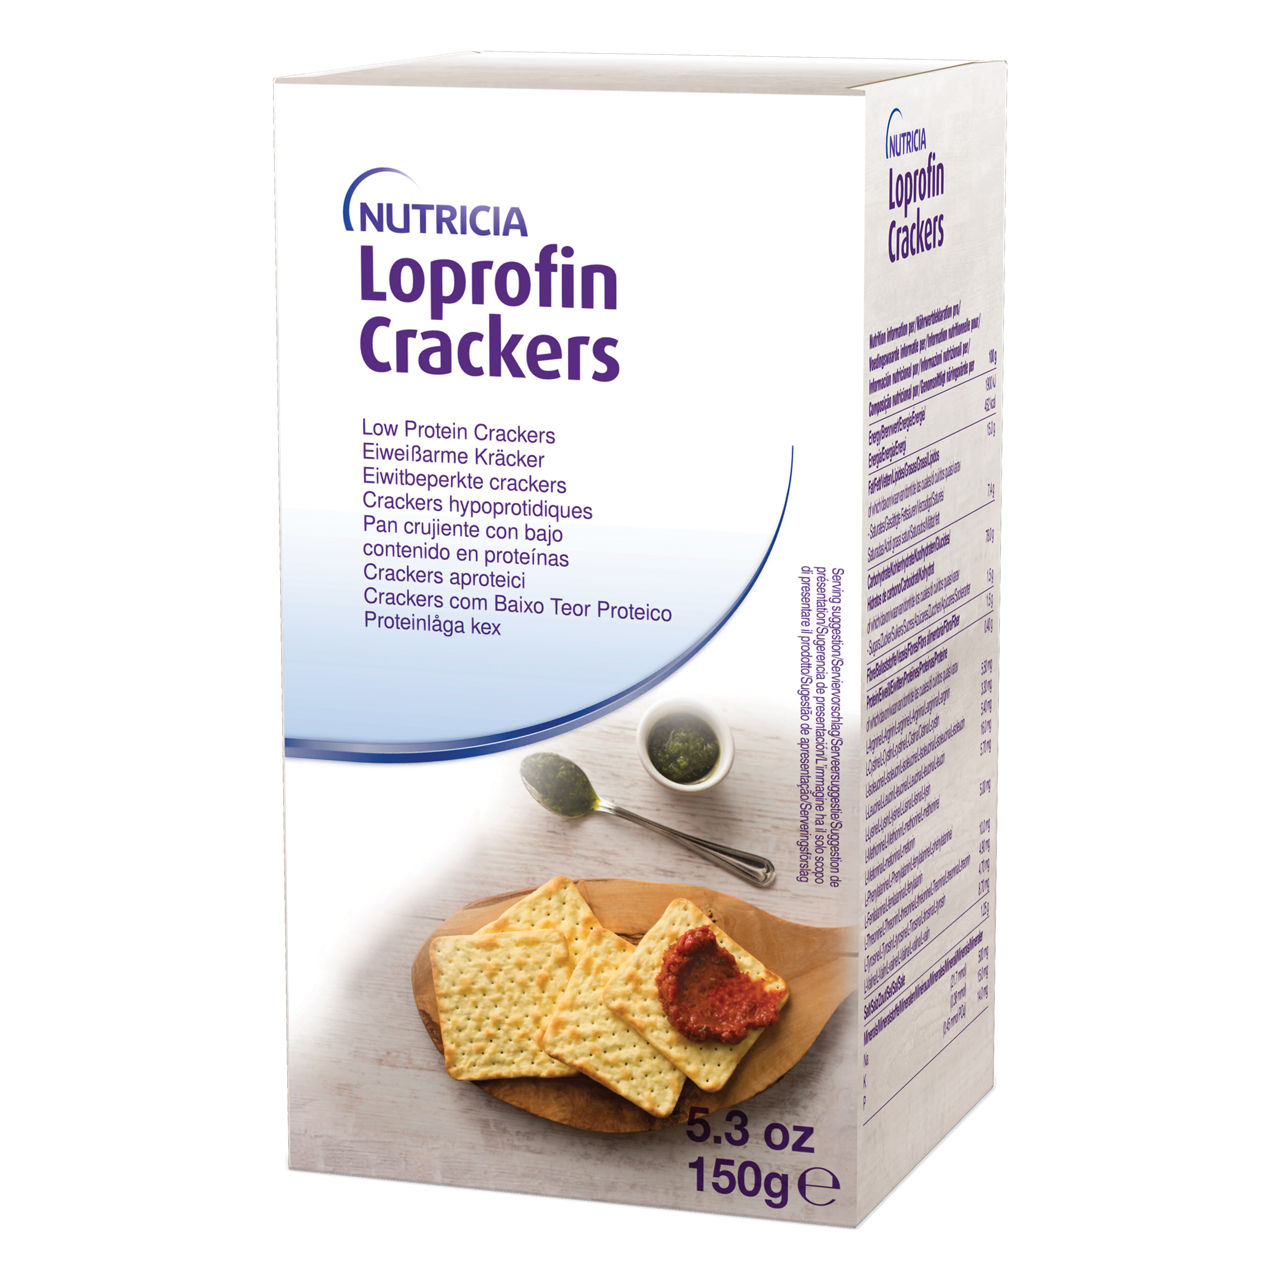 Loprofin Low Protein Crackers 150g Box